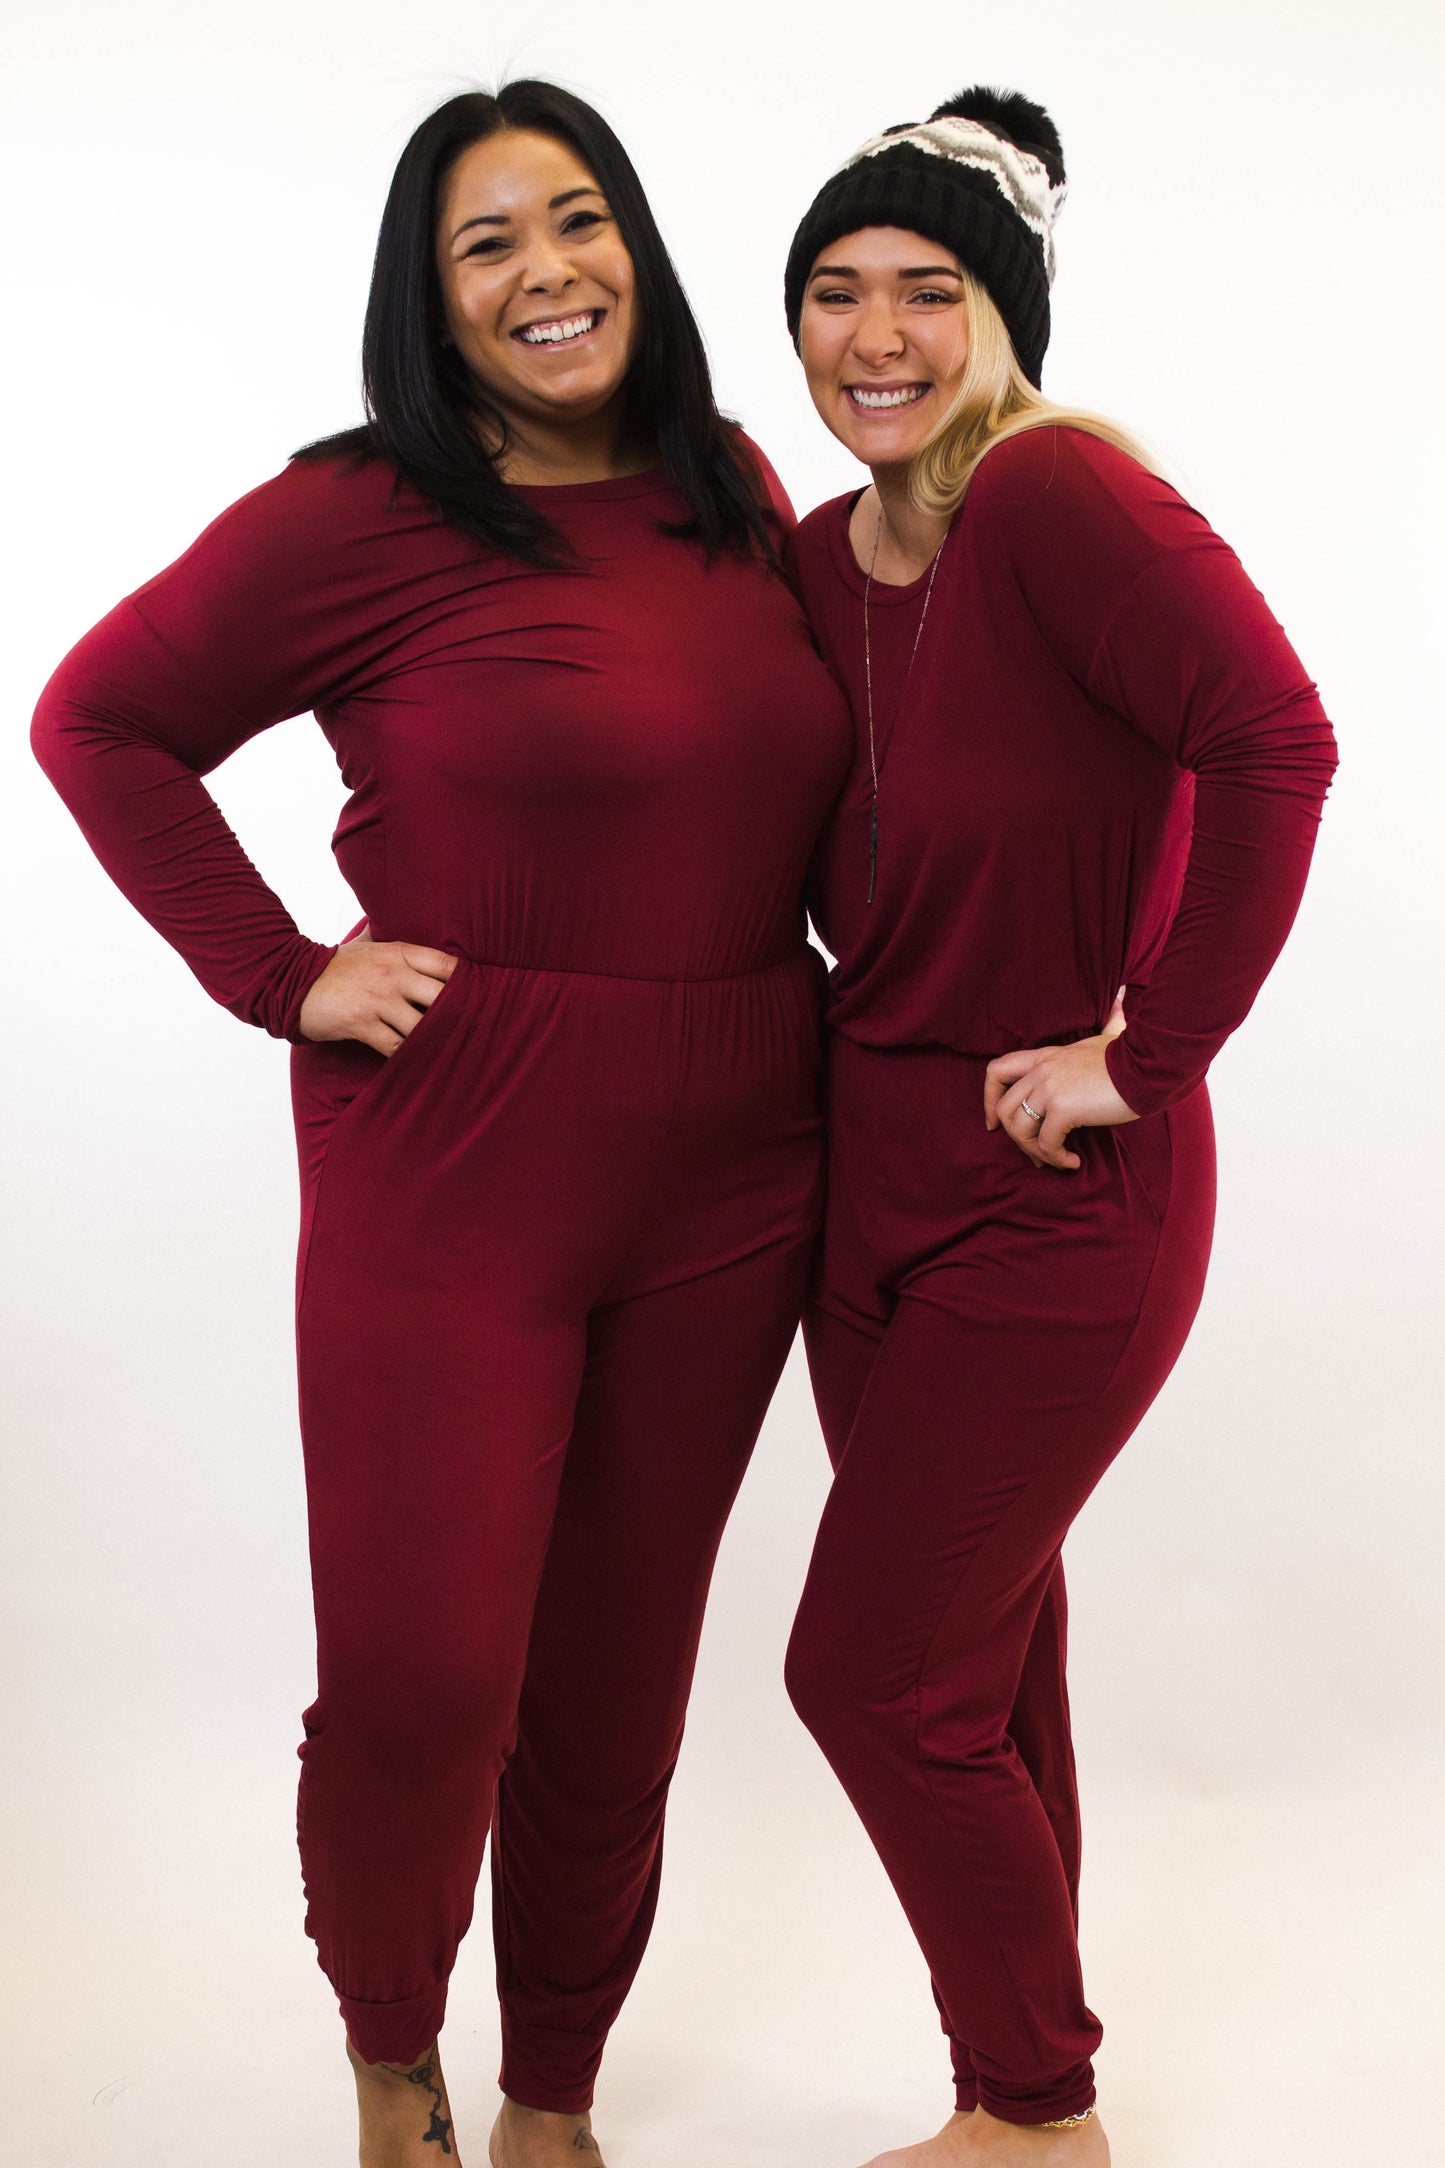 two ladies wearing matching red jumpsuits smiling hands on hips